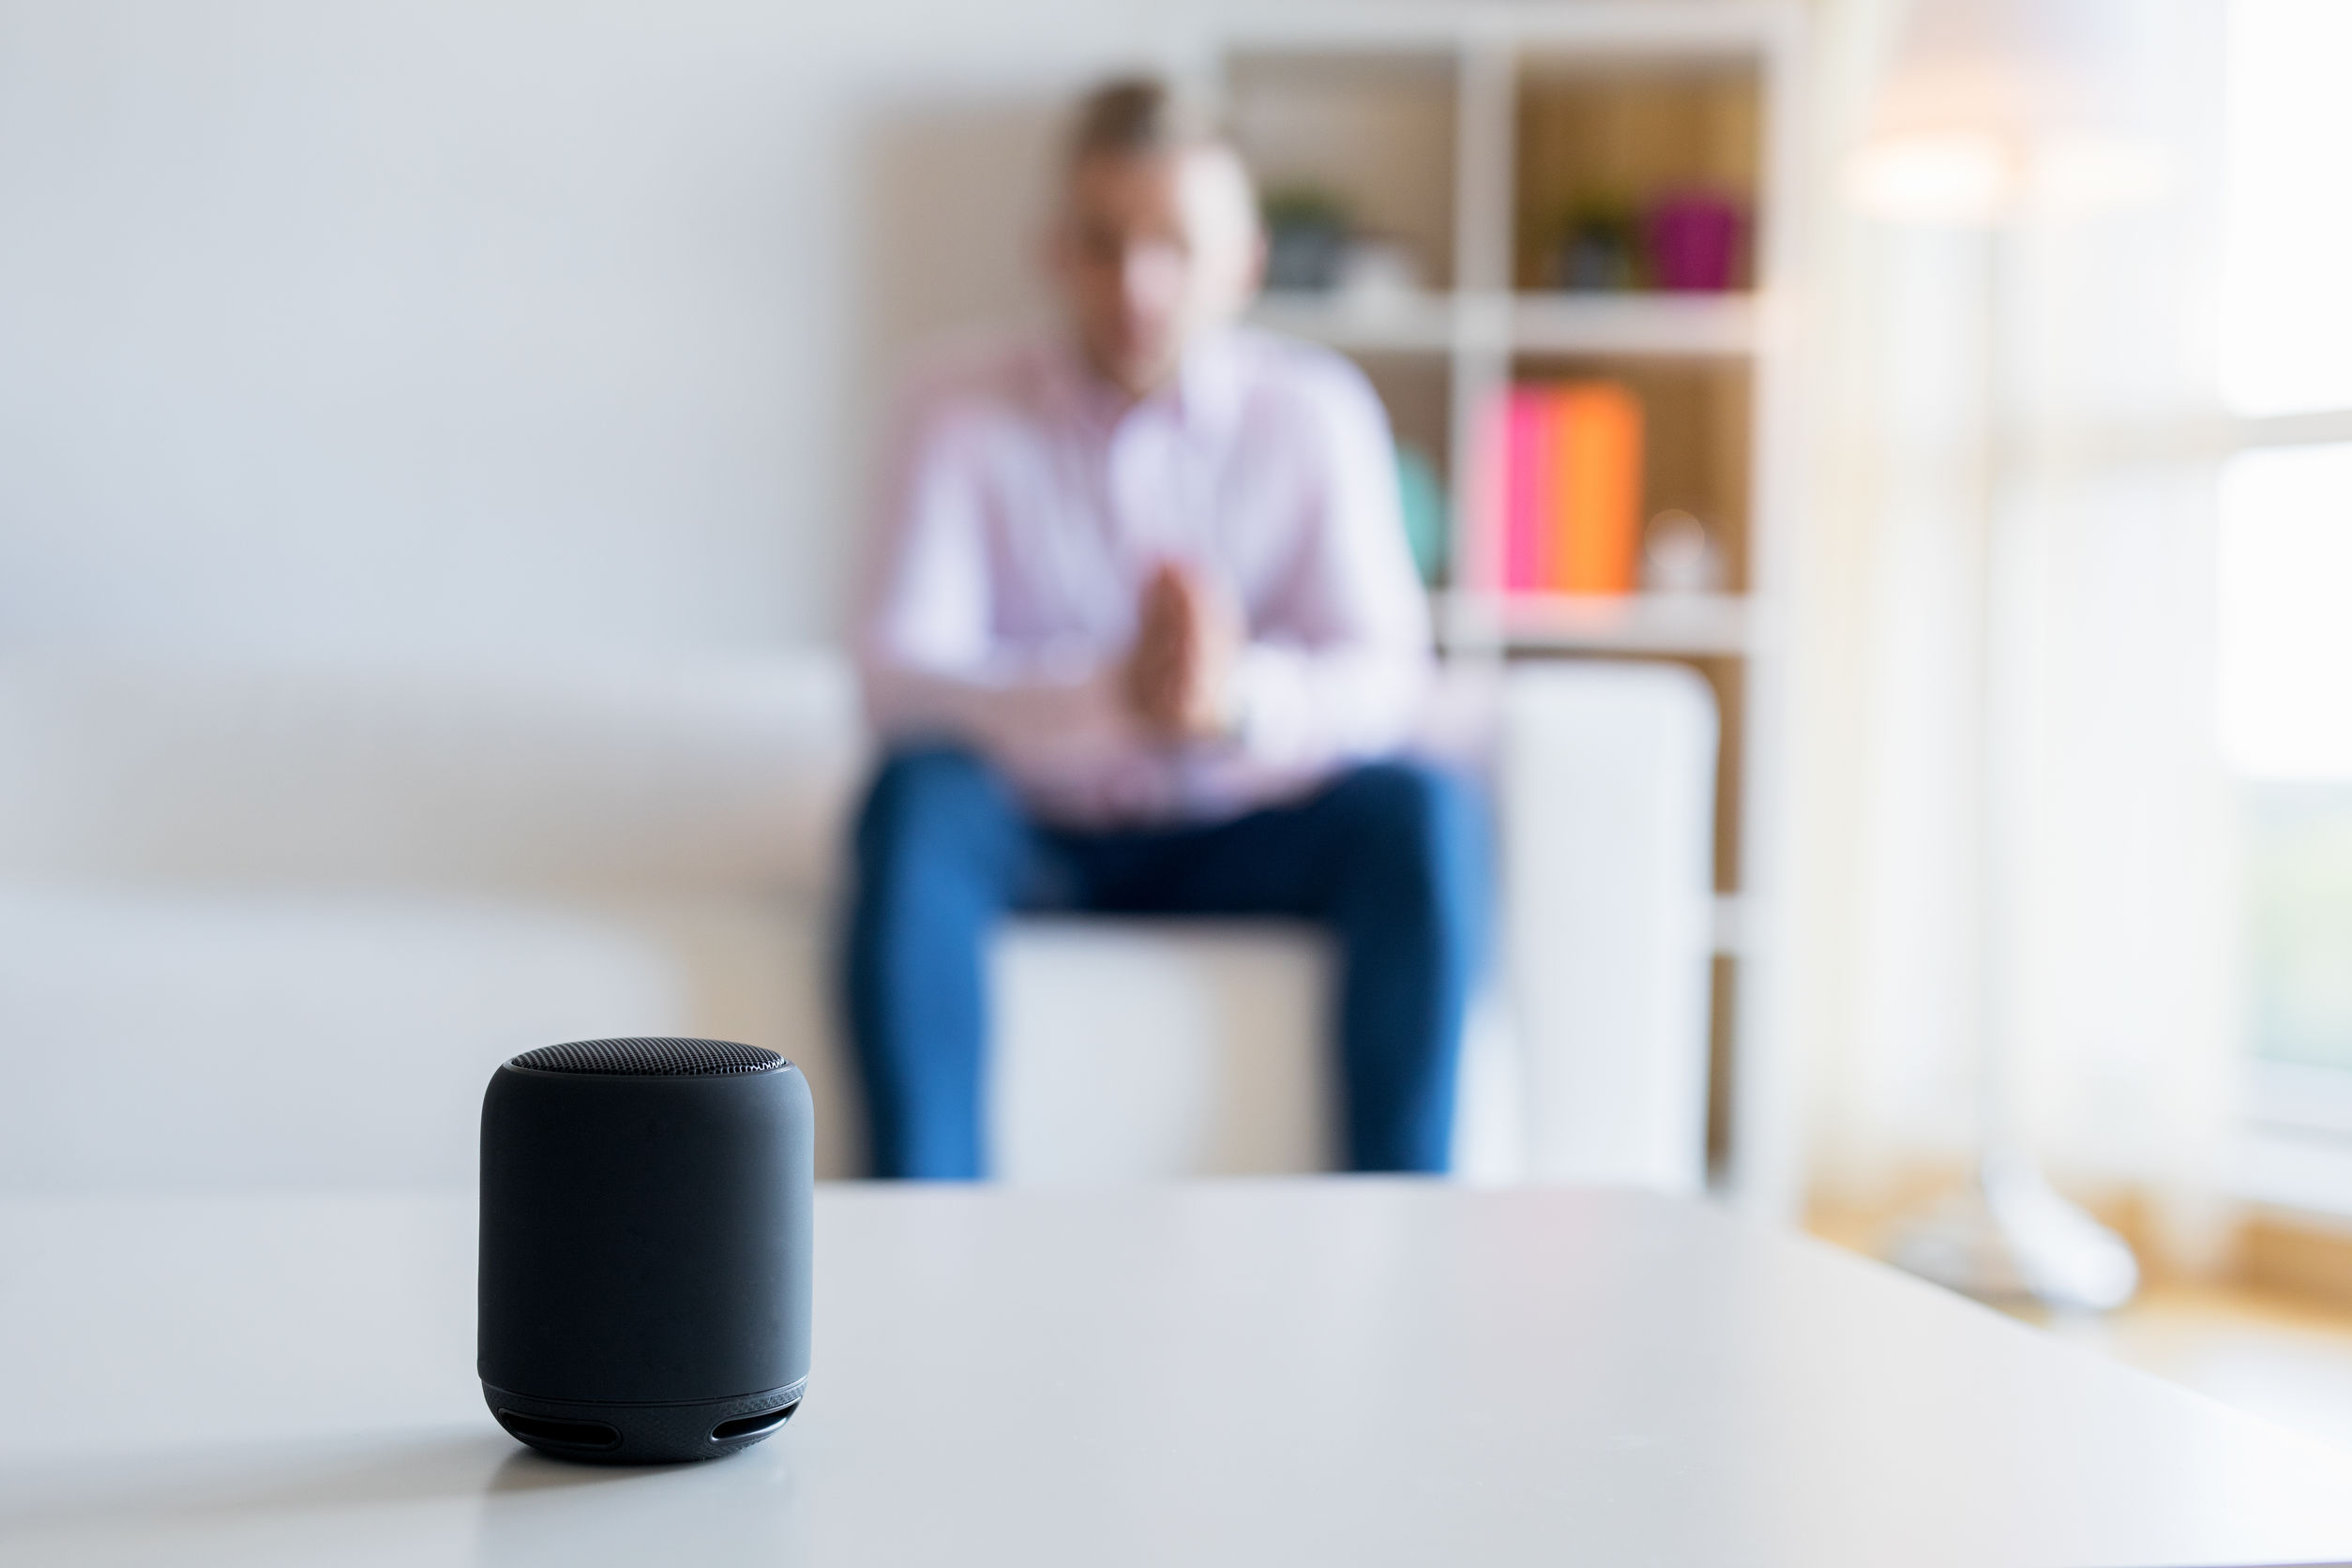 Man talking to virtual assistant smart speaker in living room|Man hand touching to multimedia system with app personal assista|man using internet voice search technology on mobile phone